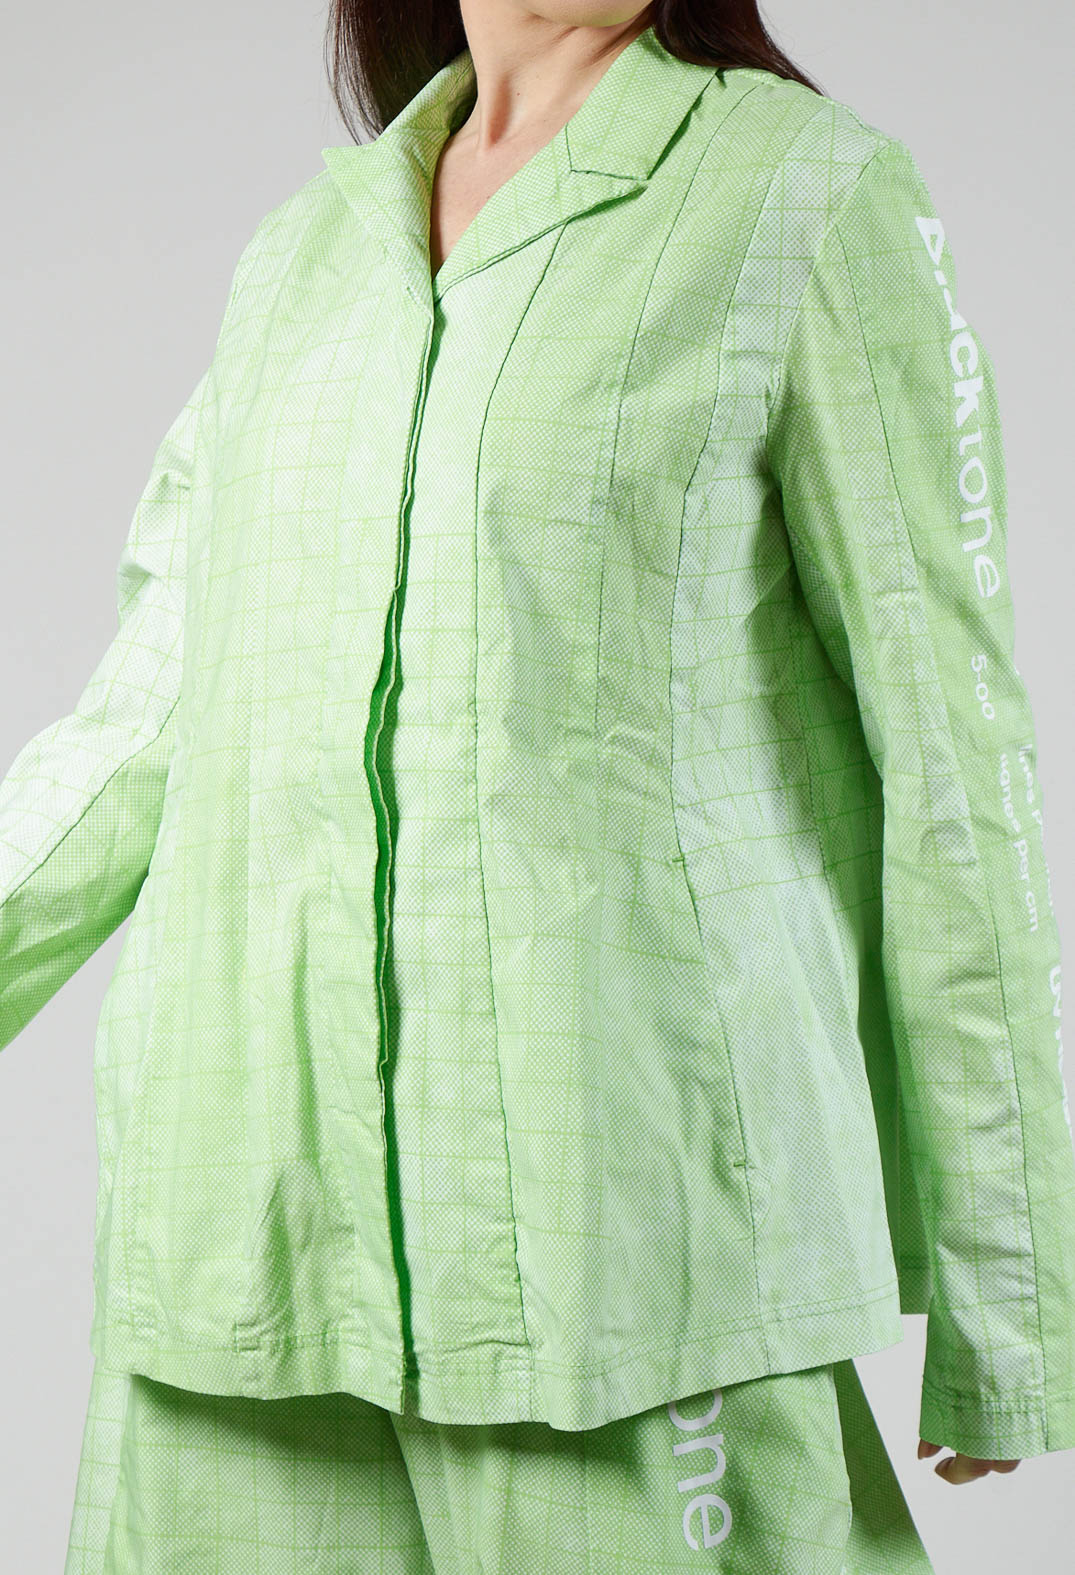 Tailored Jacket in Placed Lime Print